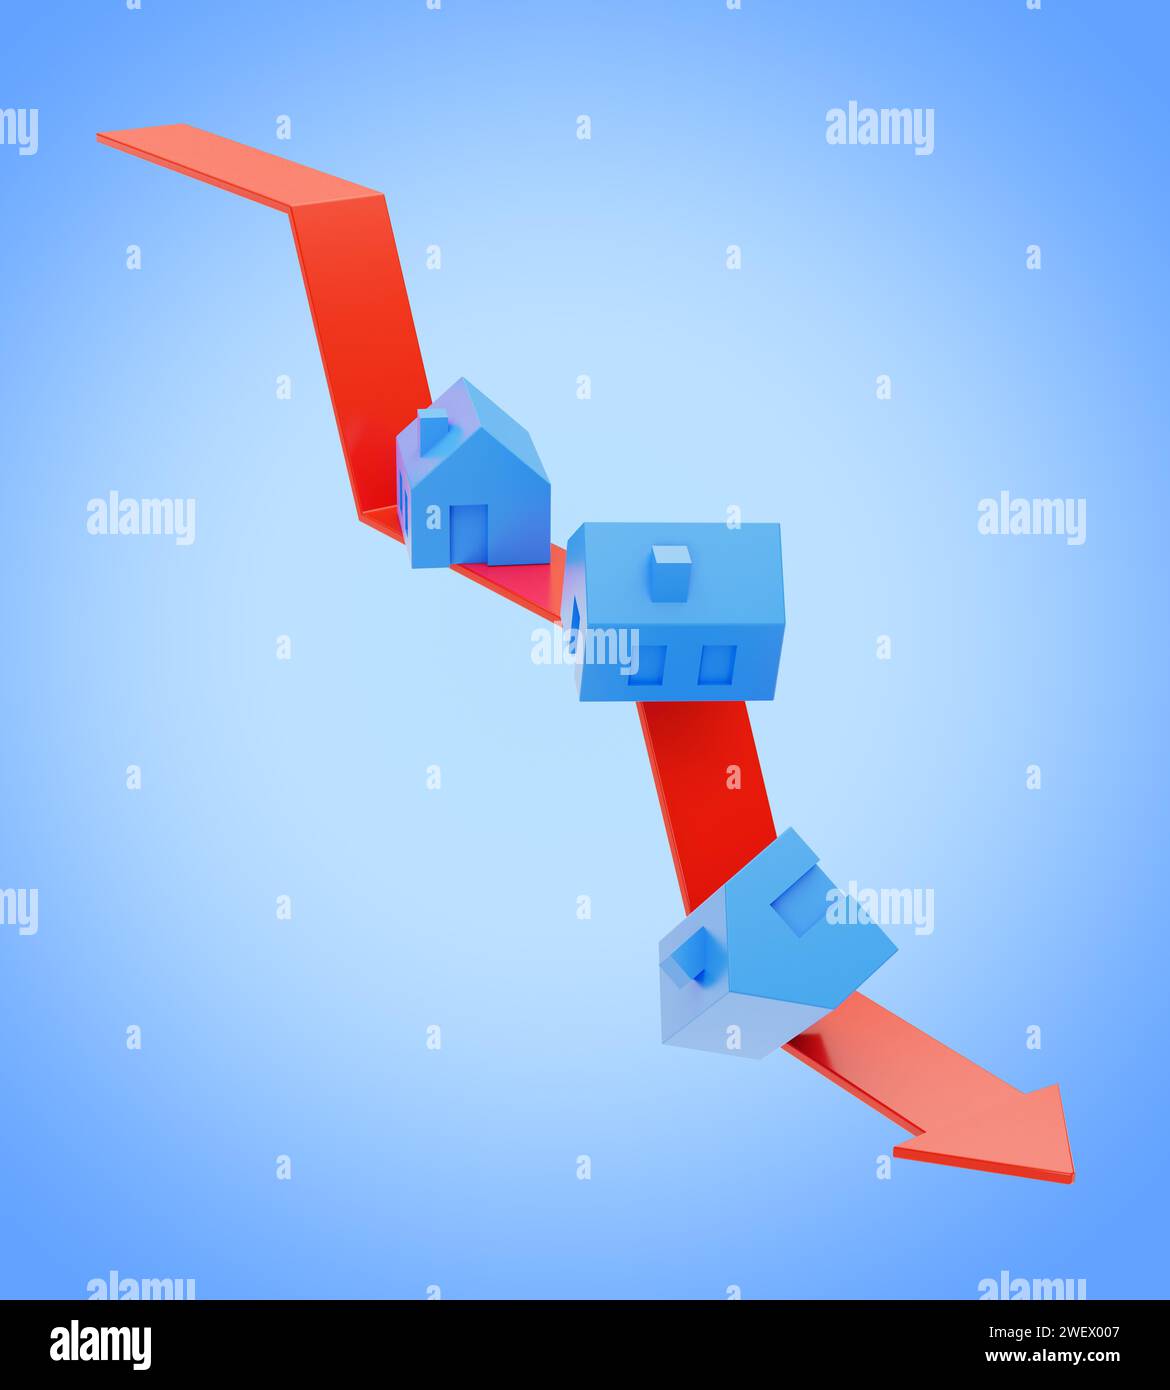 Falling real estate prices concept. several blue houses tumbling on a downward pointing red line with arrow. Blue gradient background Stock Photo